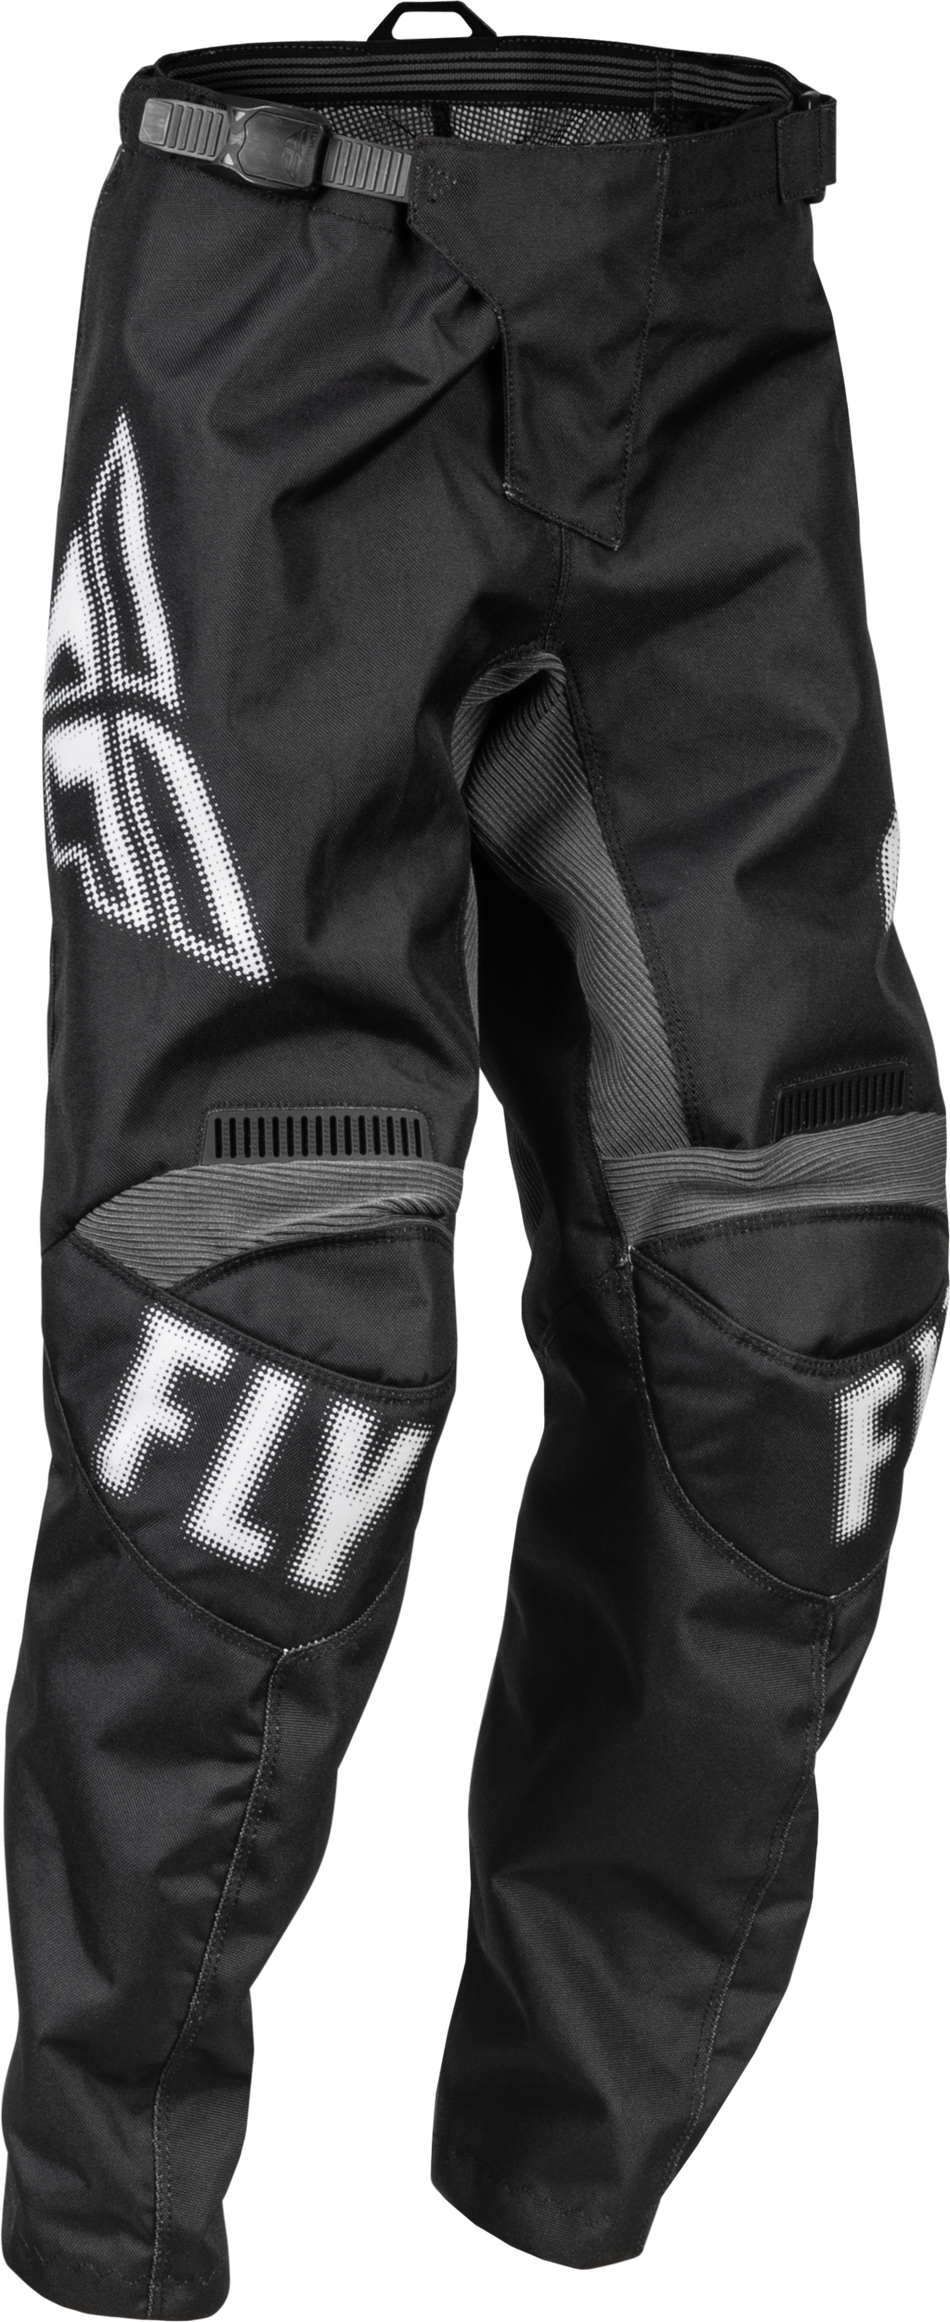 FLY RACING Youth F-16 Pants Black/White Sz 26 376-23226